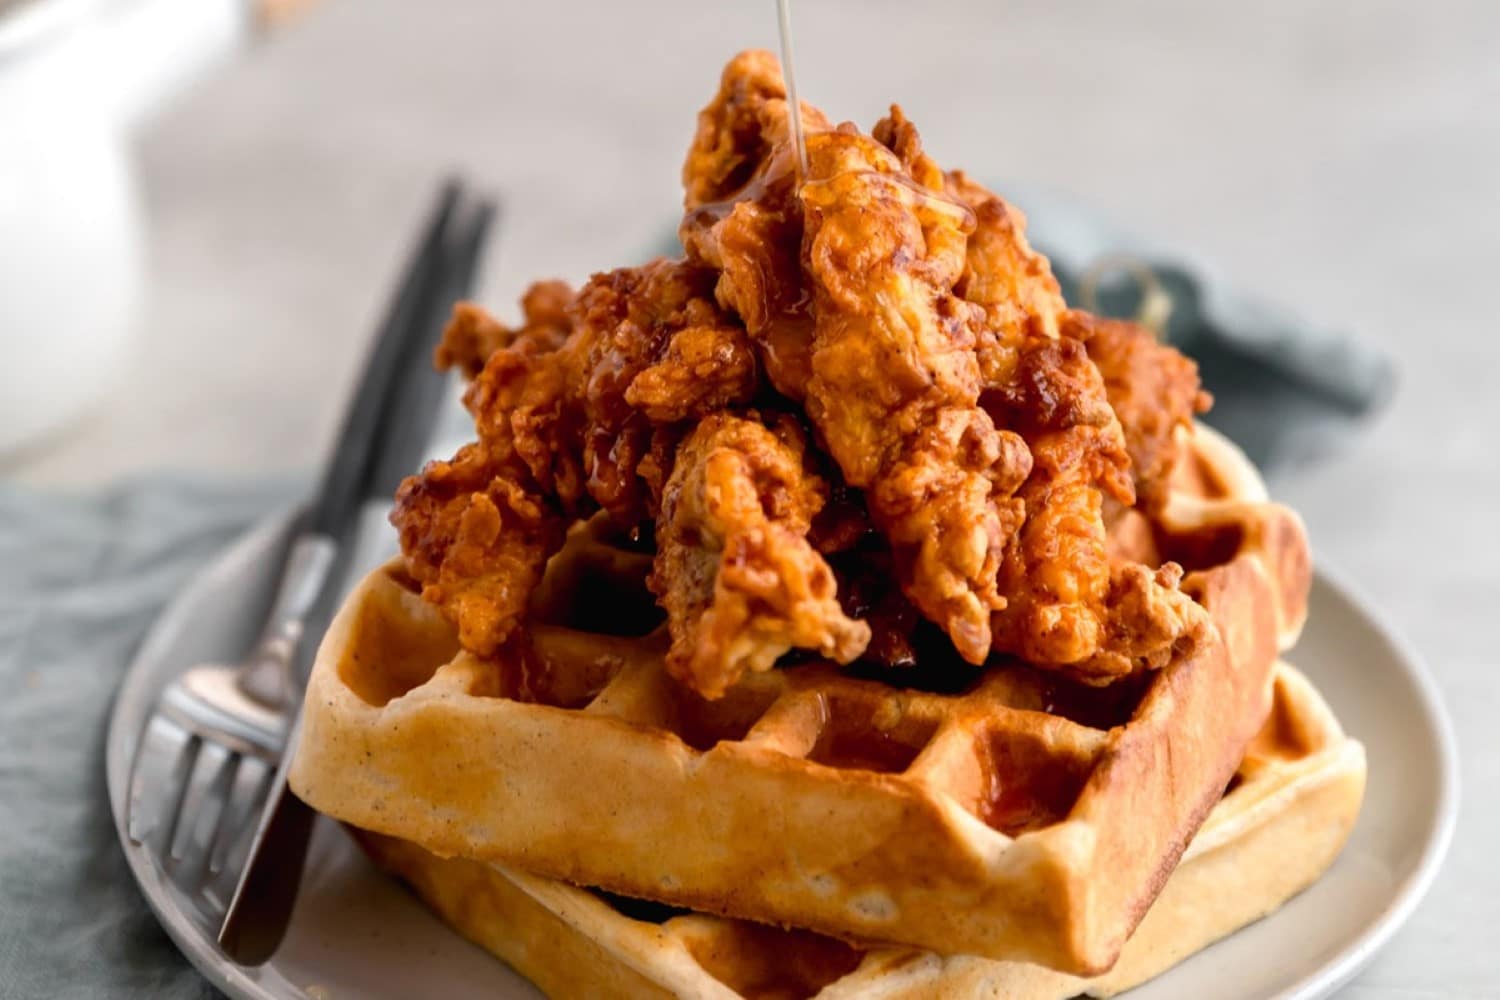 brunch recipes to try, homemade chicken and waffles